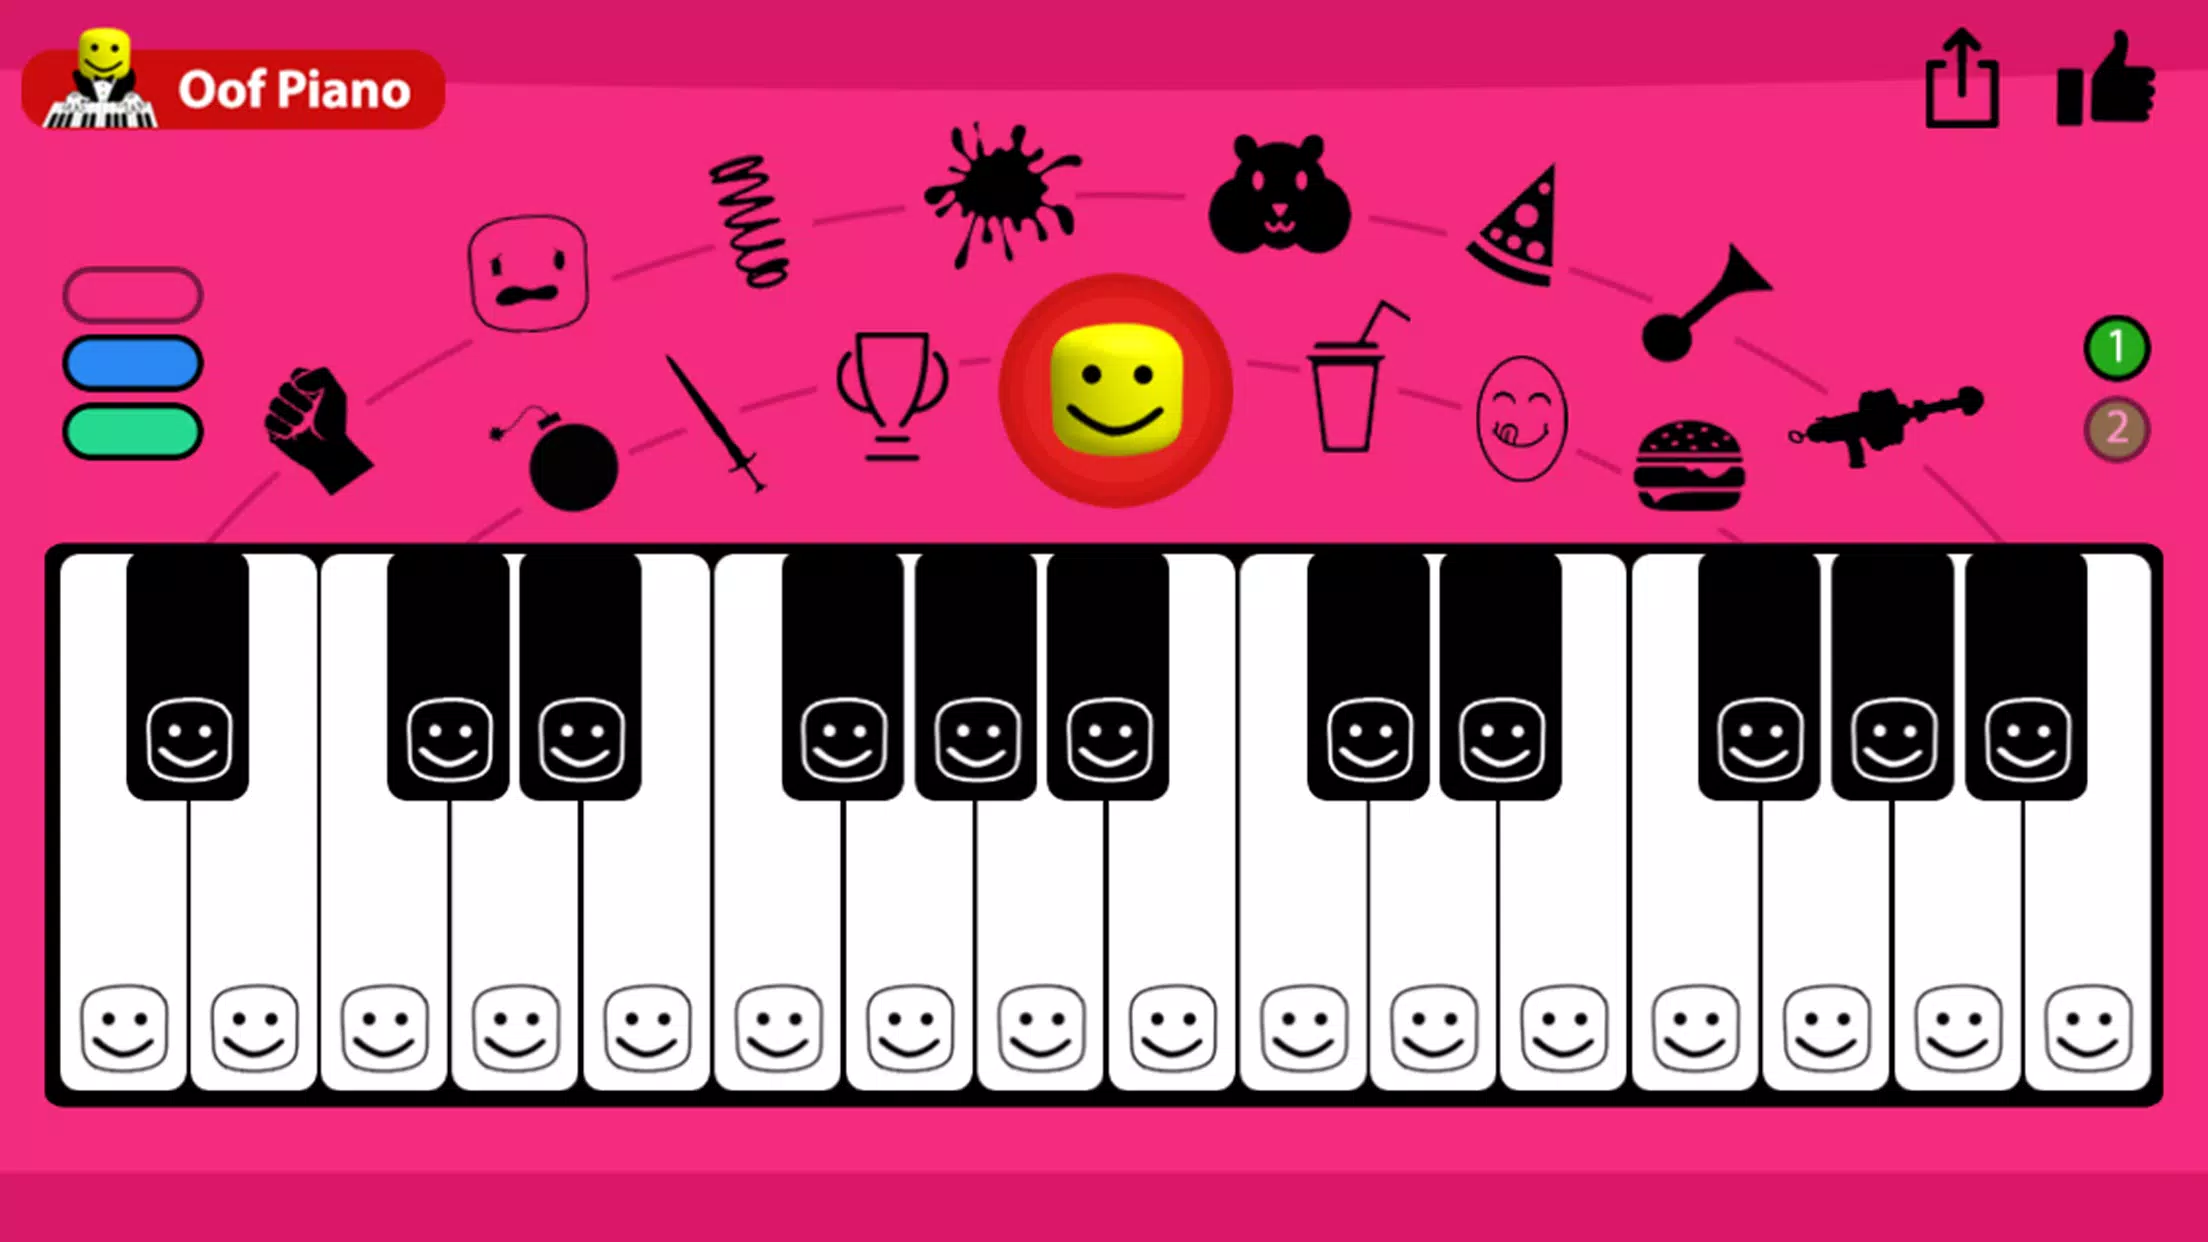 Oof Piano for Android - APK Download